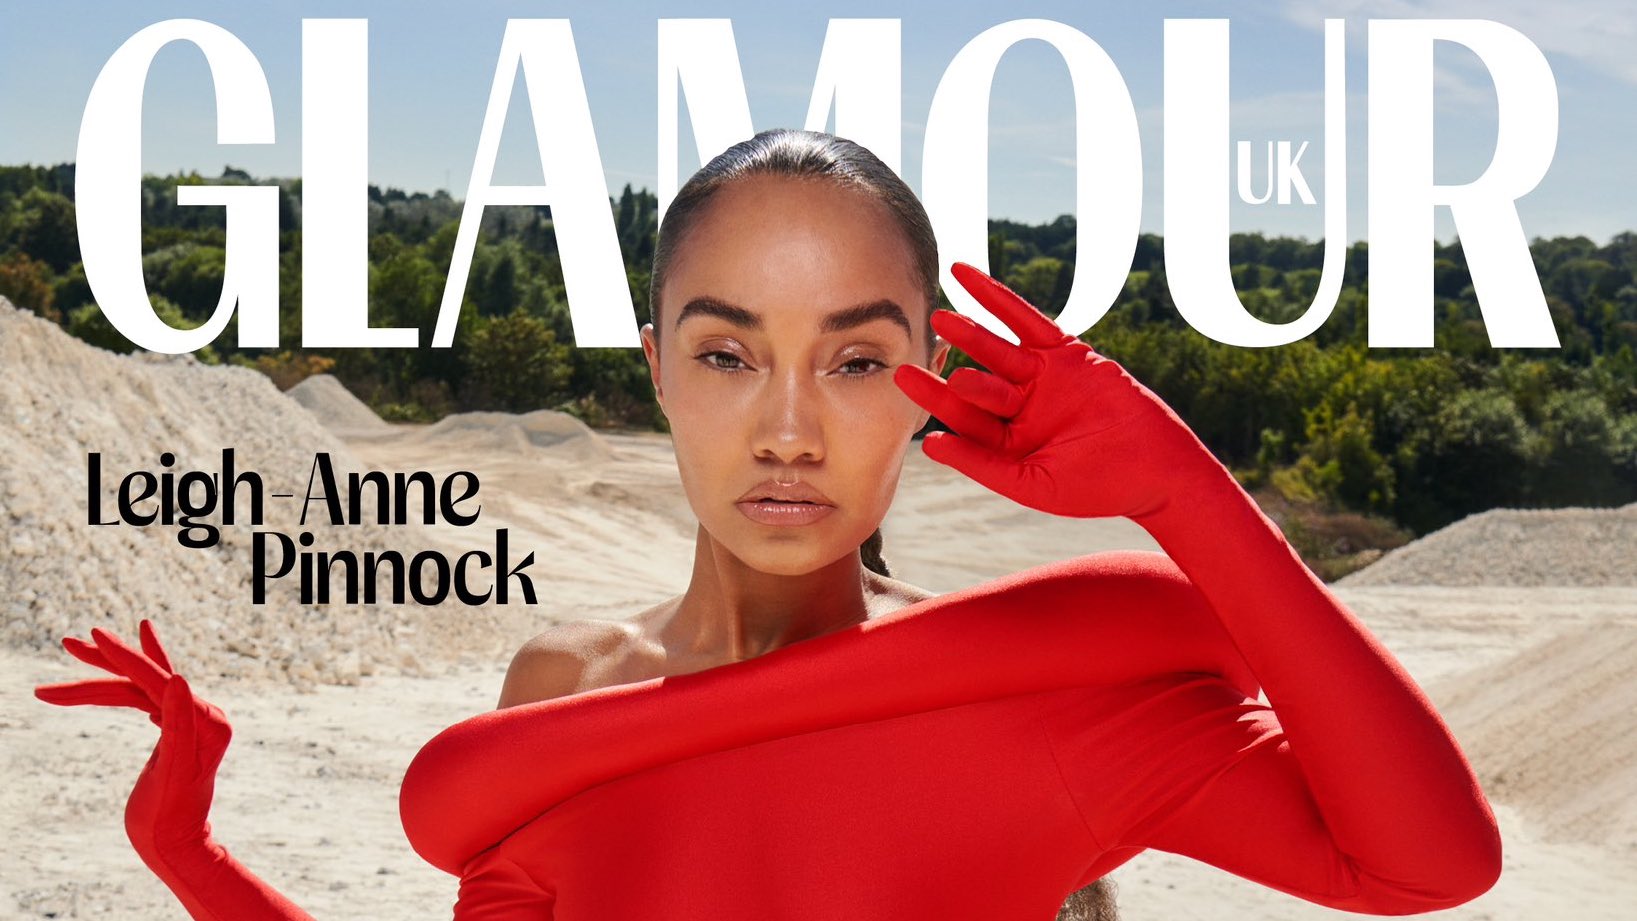 Leigh-Anne Pinnock Named Glamour UK’s Musician of the Year / Dishes on Solo Album, Memoir, & More